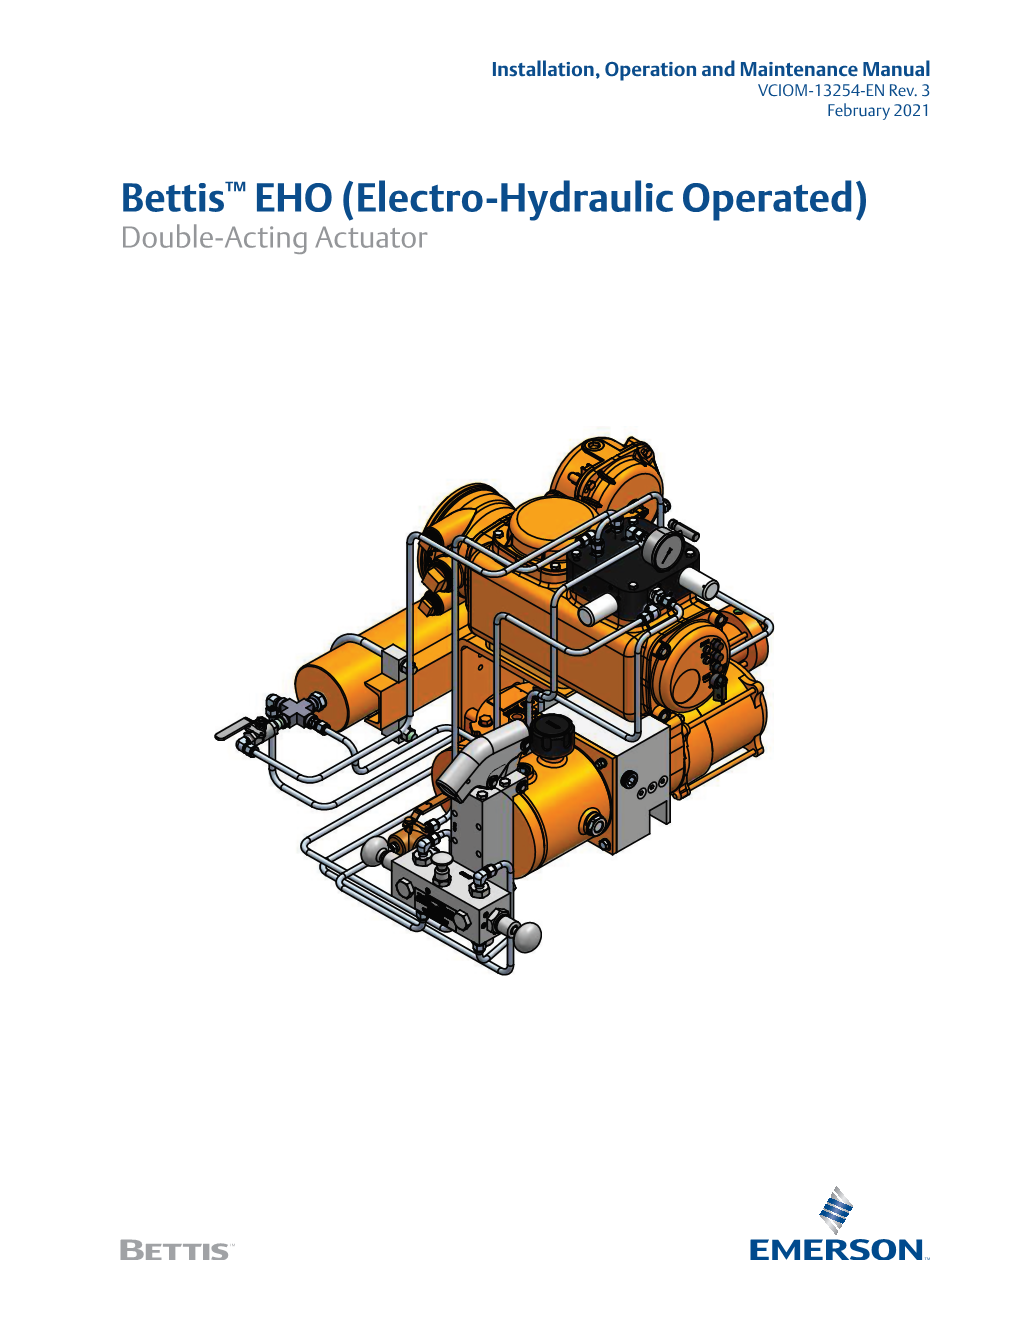 (Electro-Hydraulic Operated) Double-Acting Actuator